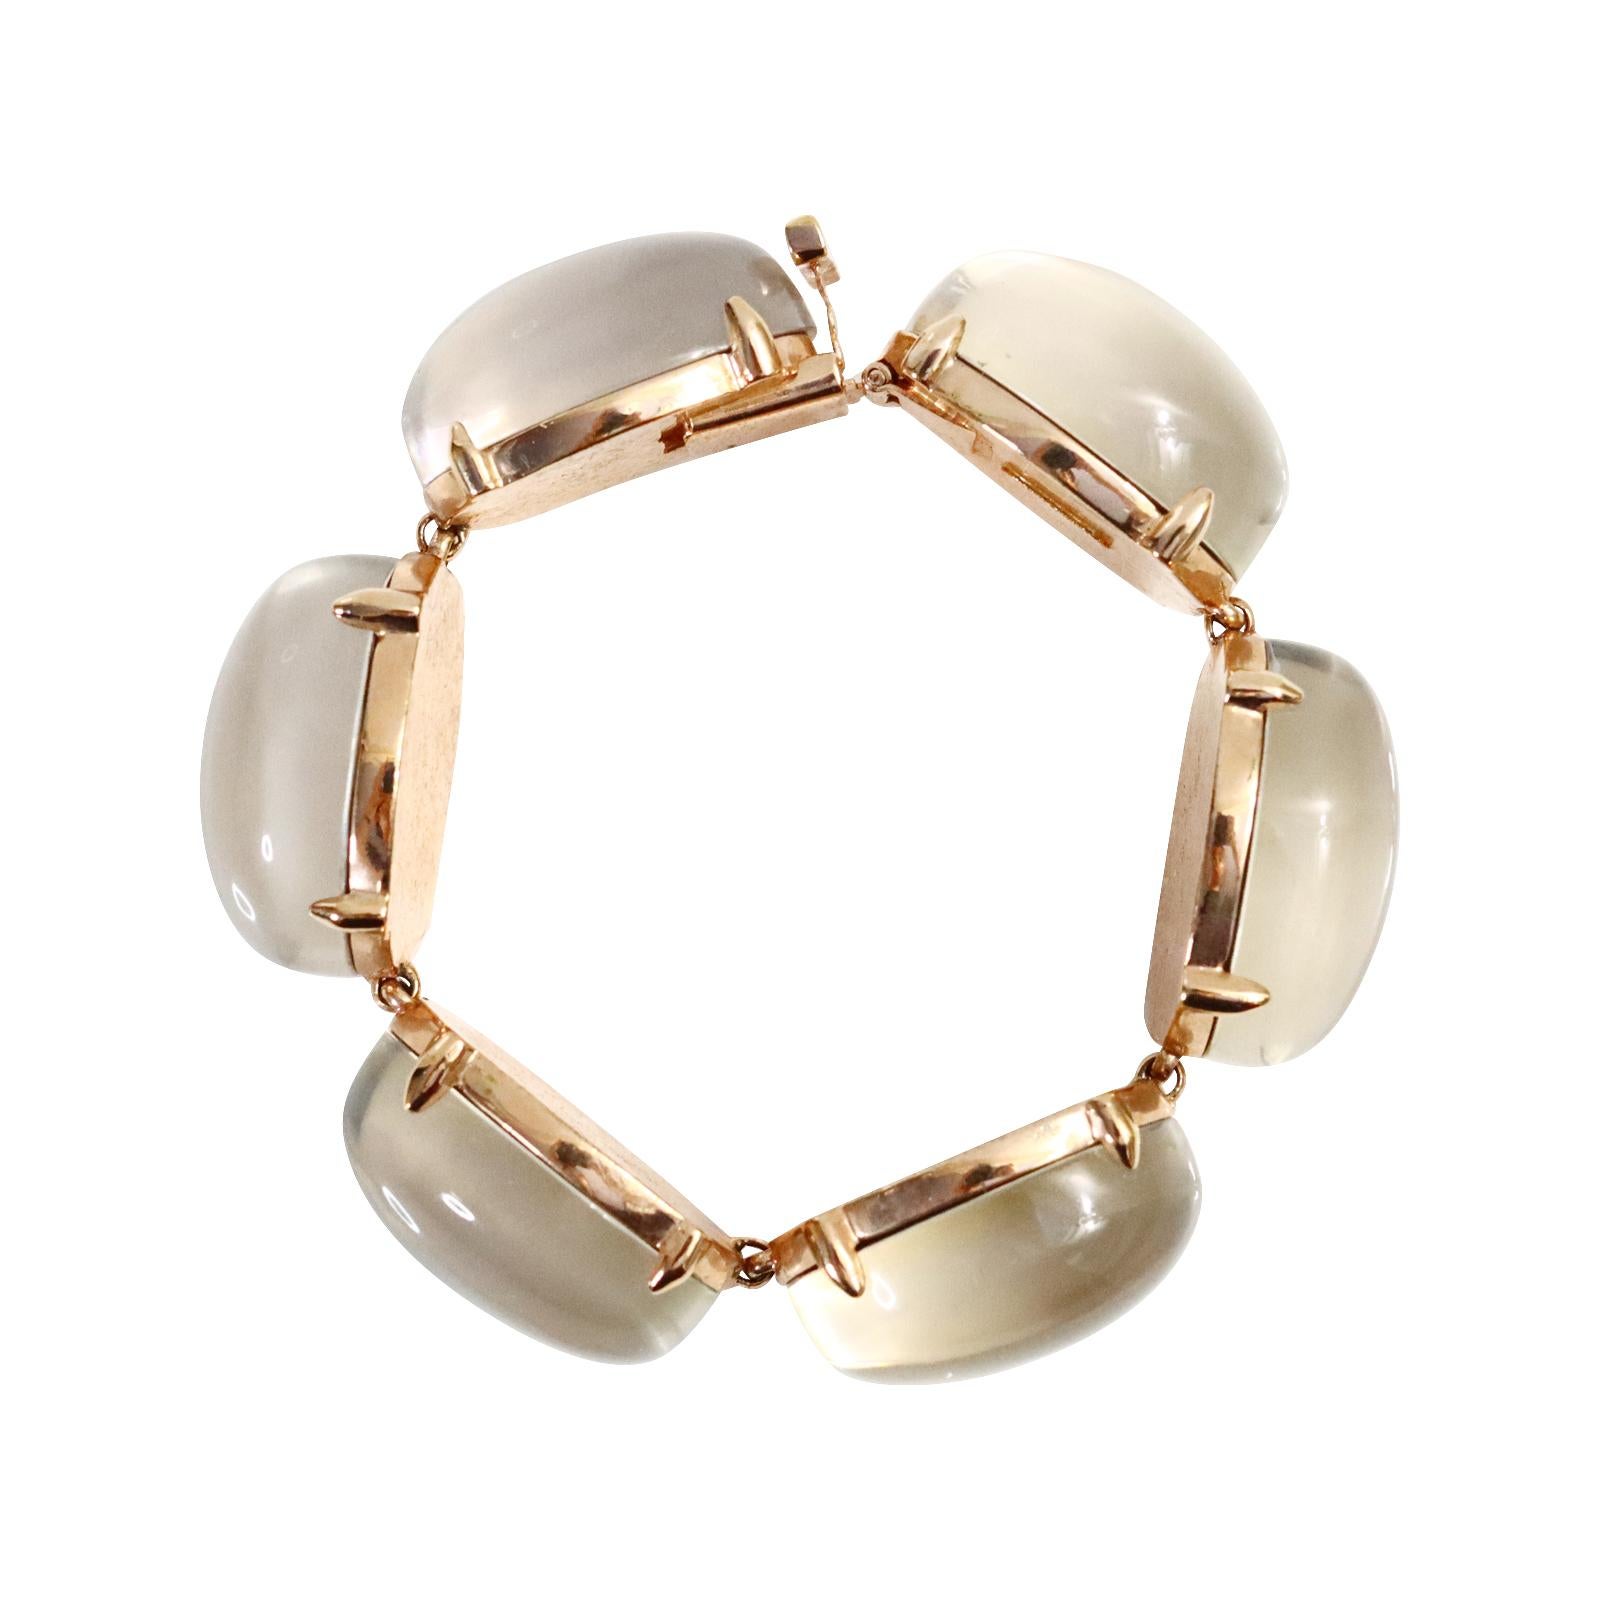 Vintage Replica Italy Rose Gold with Milky Gray Cabochon Circa 1990s.  I love this bracelet.  The chic simplicity of this is so La Dolce Vita.  This is heavy and substantial and prong set. The color varies and would probably vary dependent on what